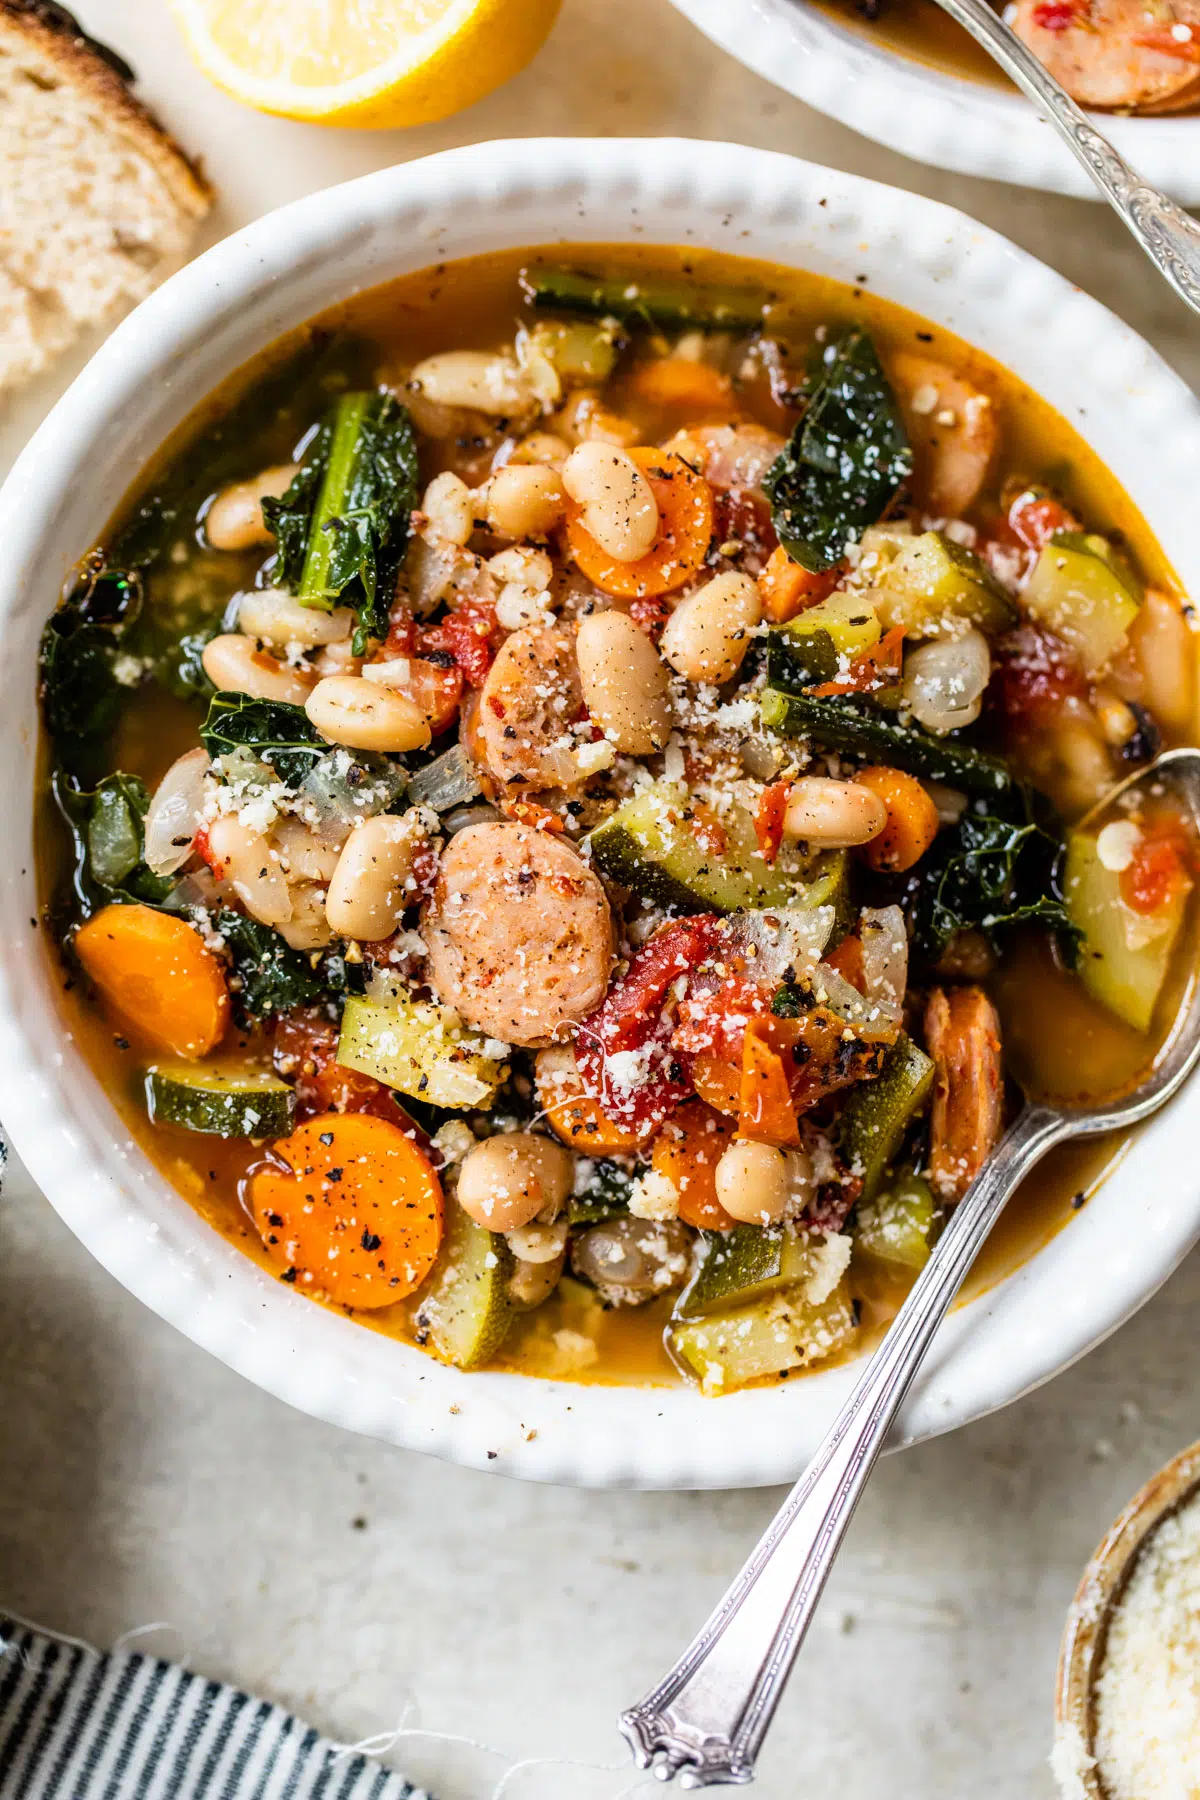 A delicious bowl of sausage soup with beans and vegetables.